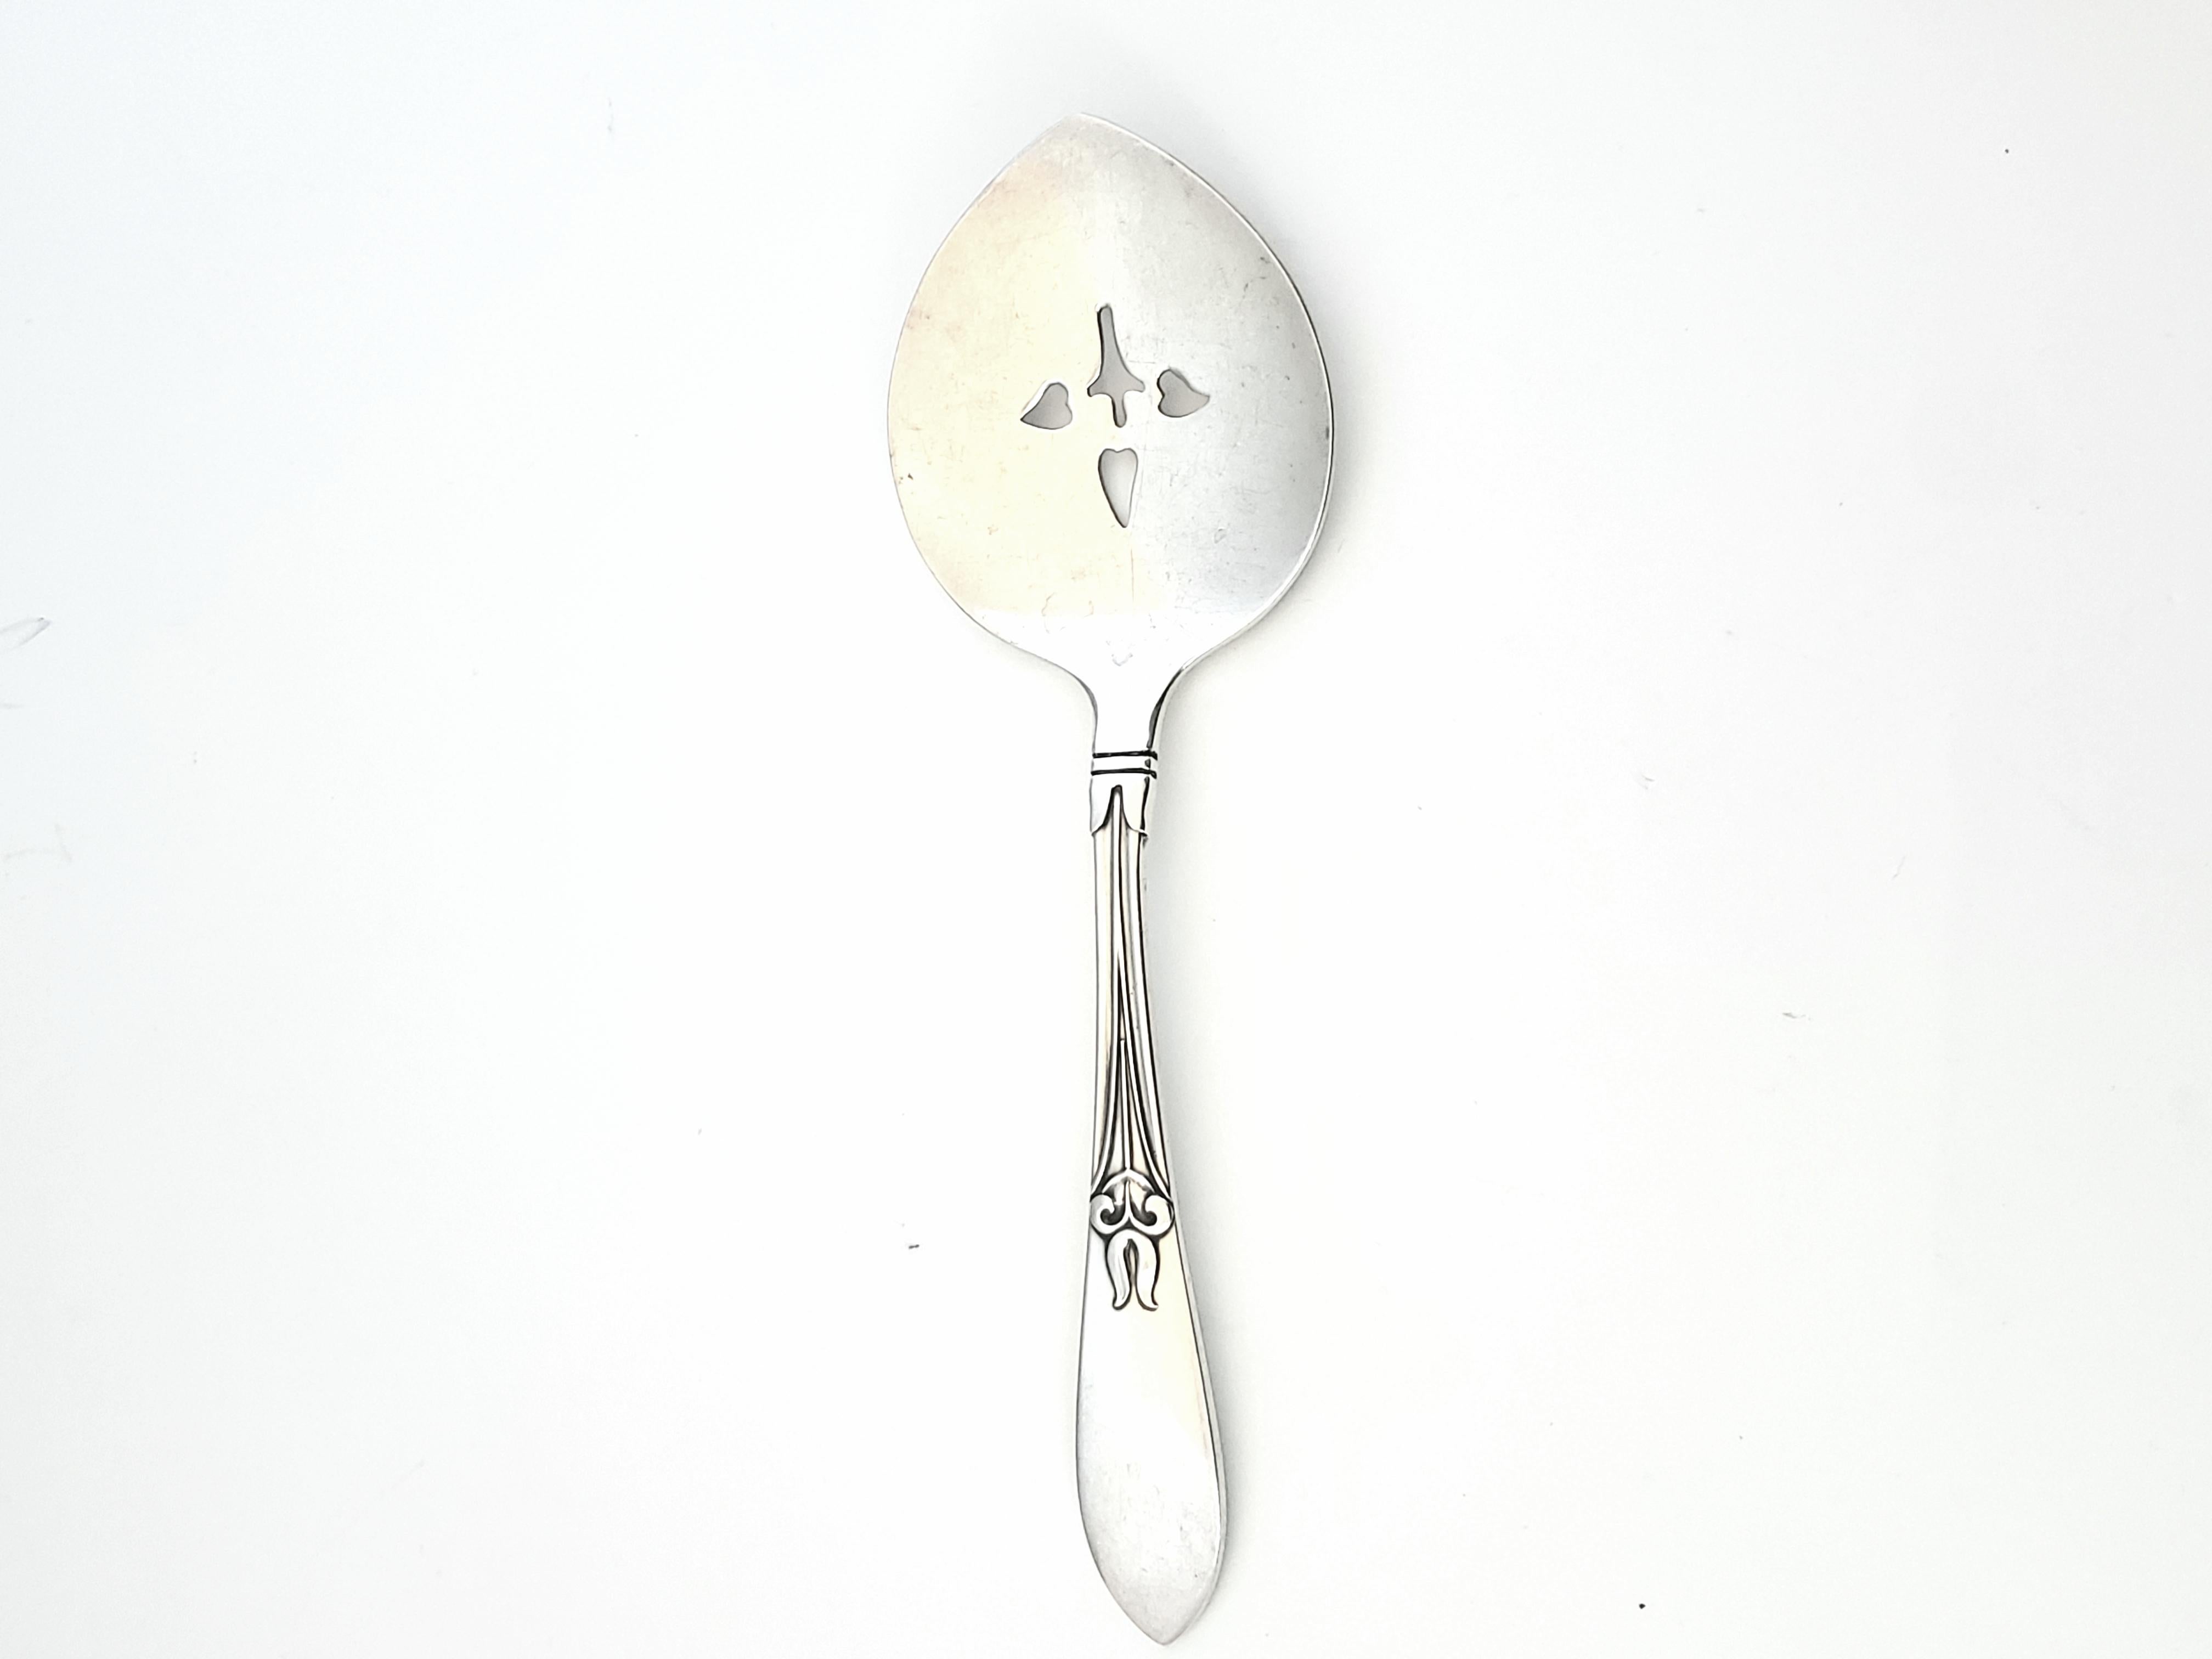 Frank W. Smith Co. Sterling Silver Tulipan Pierced Tomato Server

Tulipan by Frank W. Smith sterling silver Tomato Server with Tulip Piercing.

Measurements:     Server measures 7 and 3/4 inches in length.  Handle measures 3/4 inches in length. 